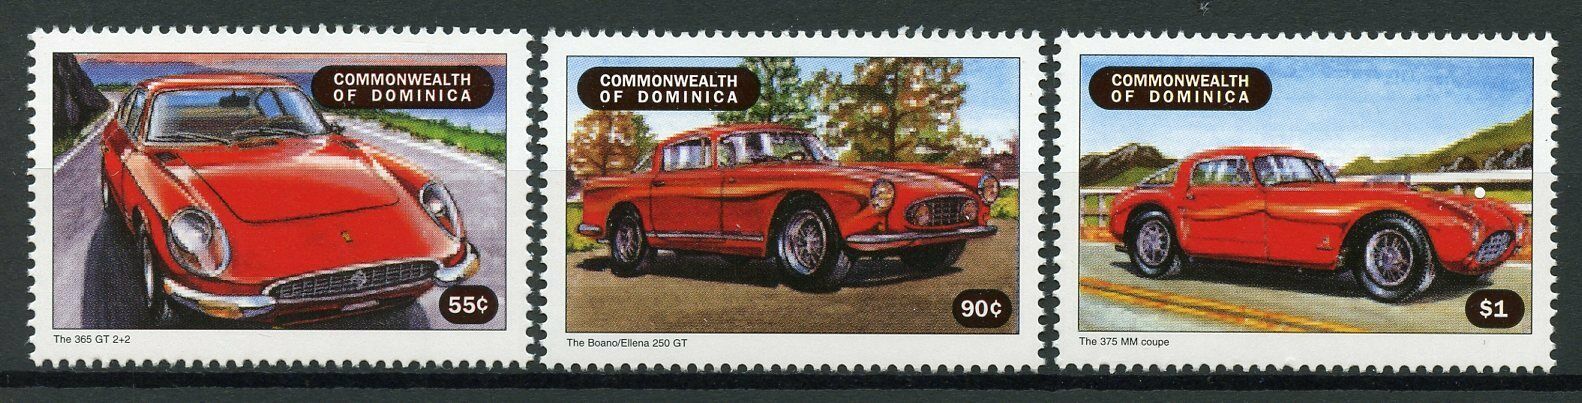 Dominica 1998 MNH Cars Stamps Ferrari 375 MM Coupe Auto Racing 3v Set